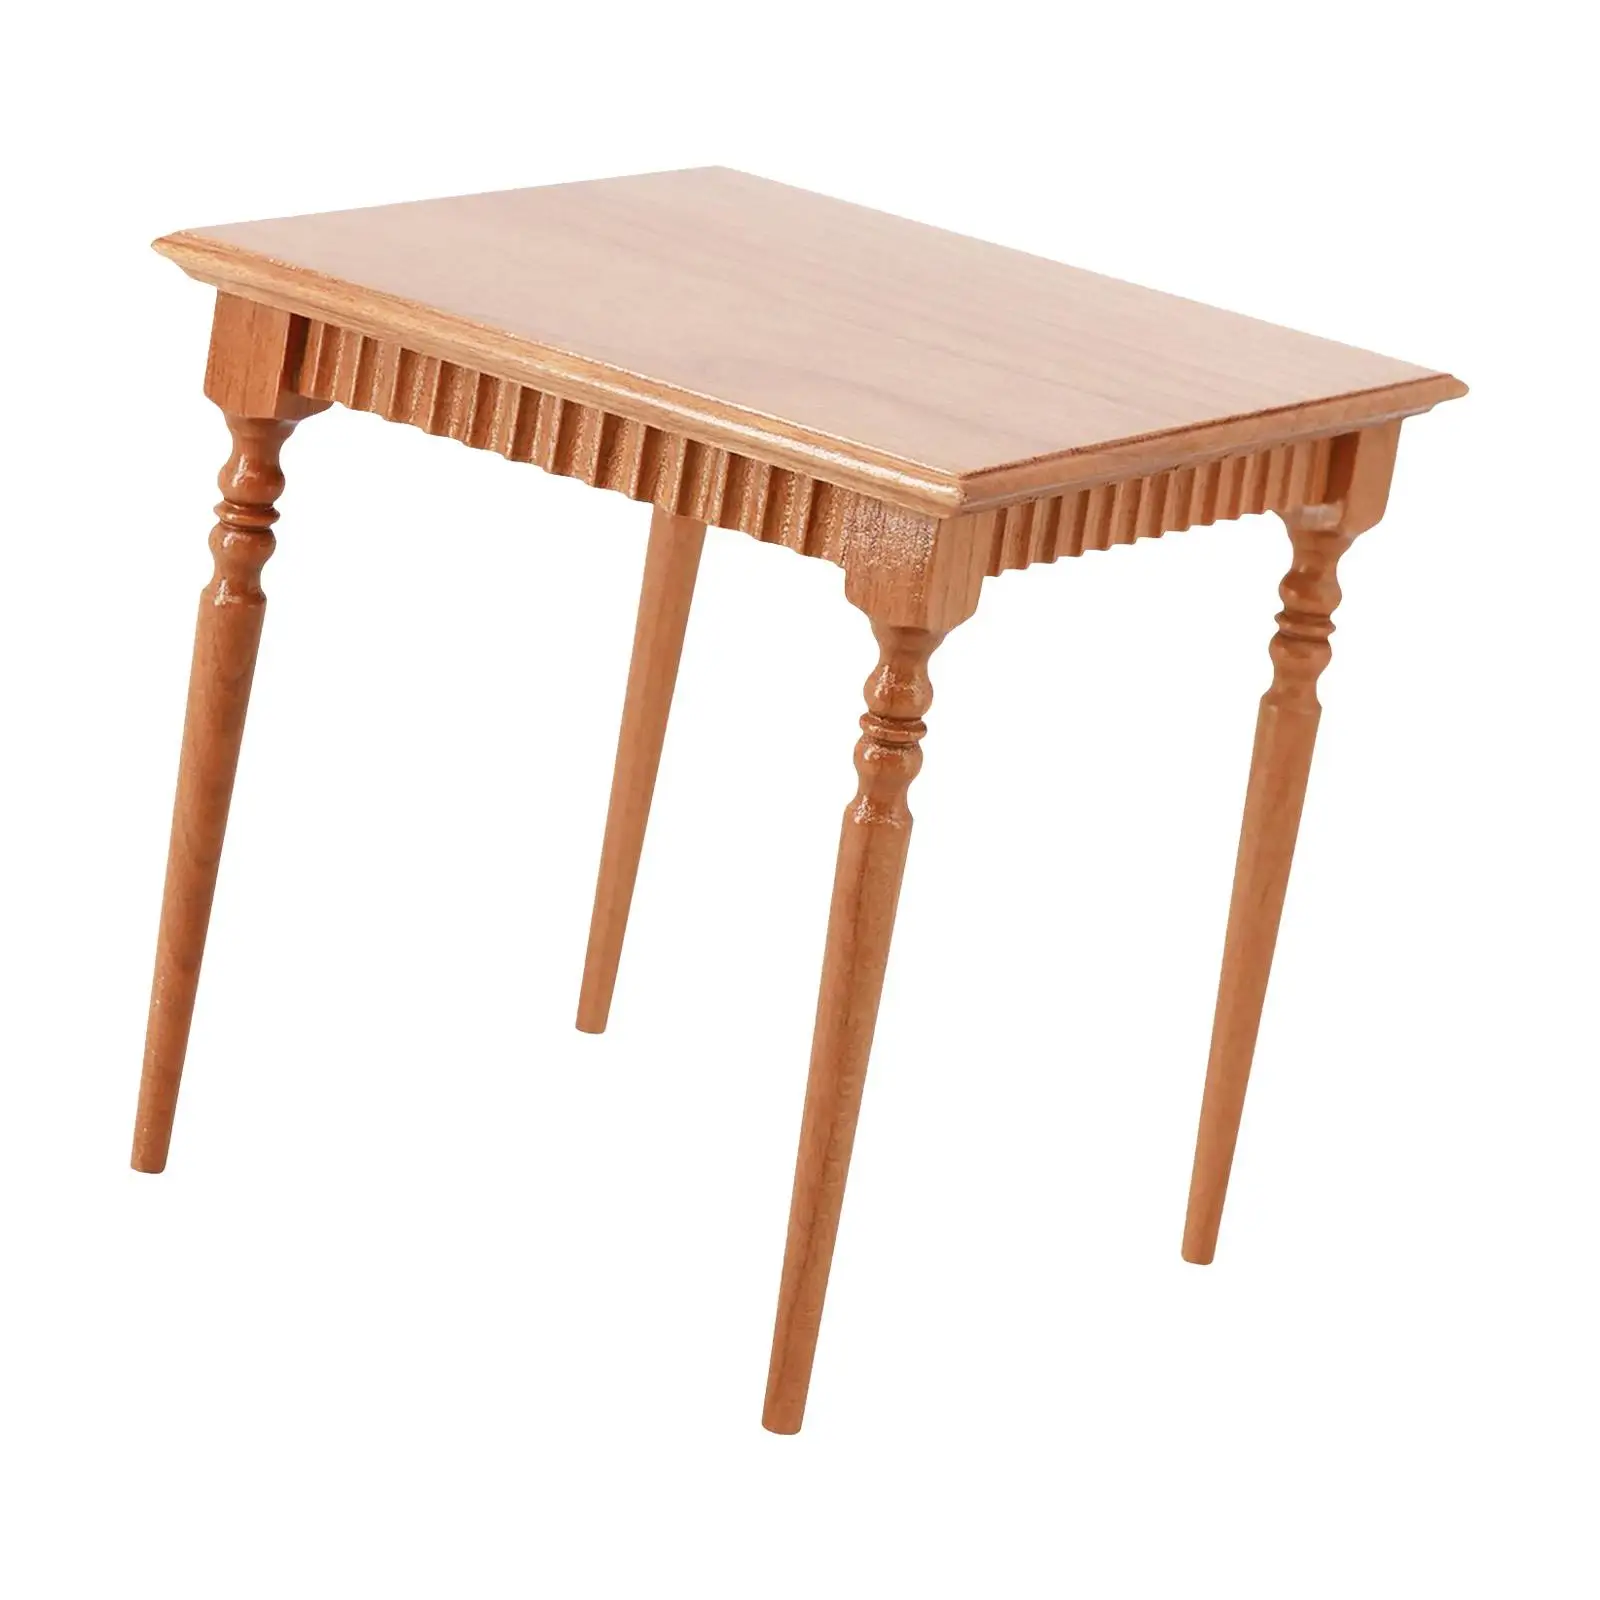 Simulation Wooden Table Dining Table for 1/6 Scale Doll Living Room Decor